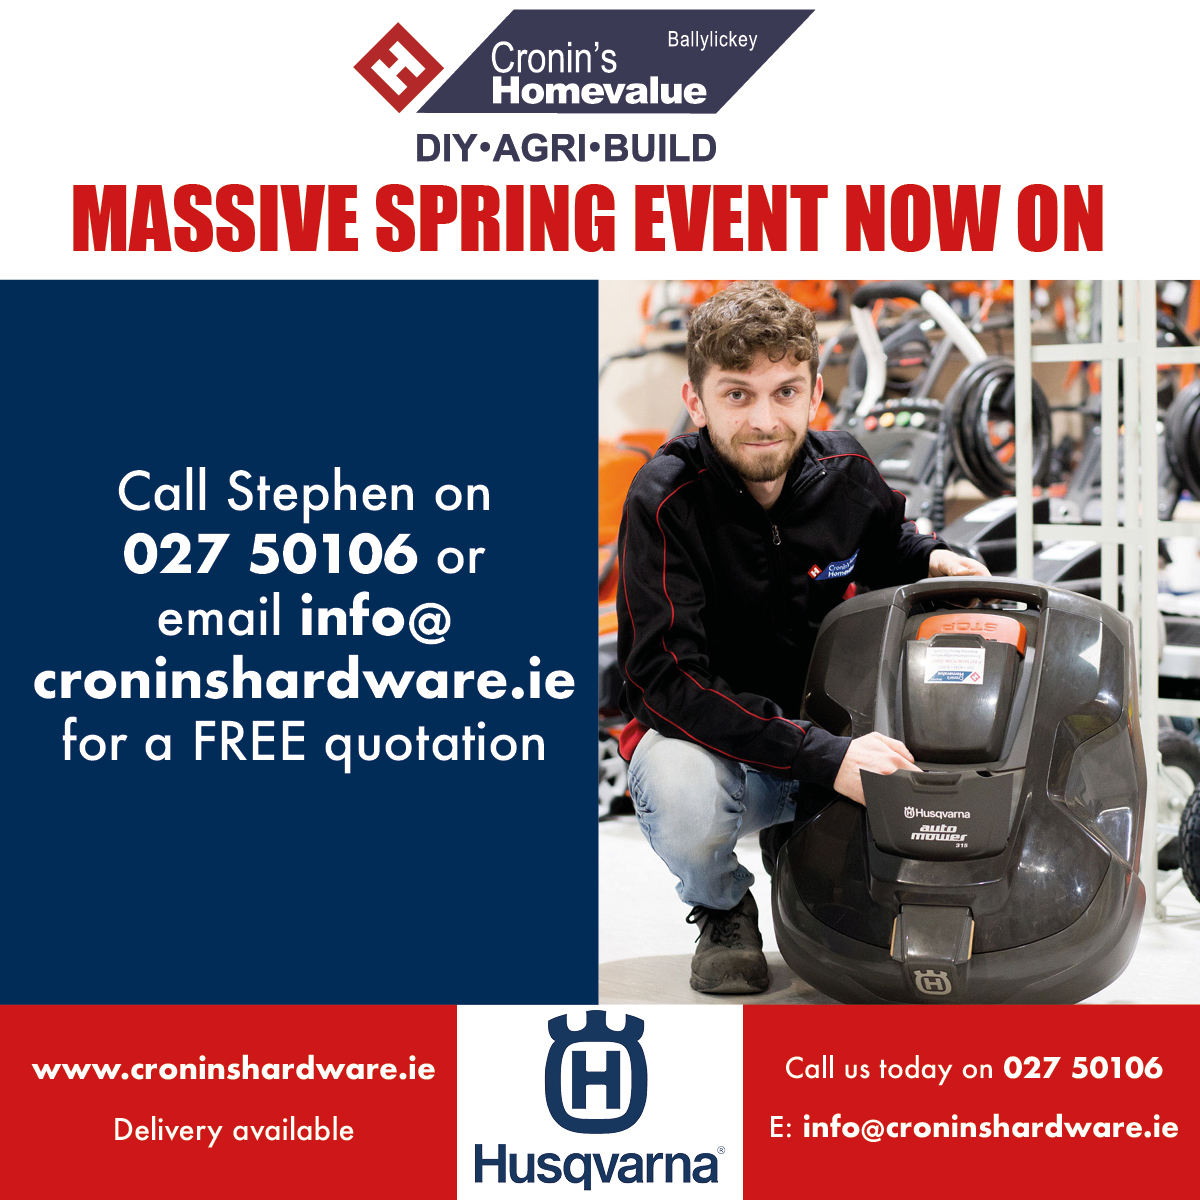 Huge Husqvarna event now on in Cronin's Hardware Ballylickey!

☎️ Call Stephen on 027 50106 or email info@croninshardware.ie for a free quotation

#SponsoredPost